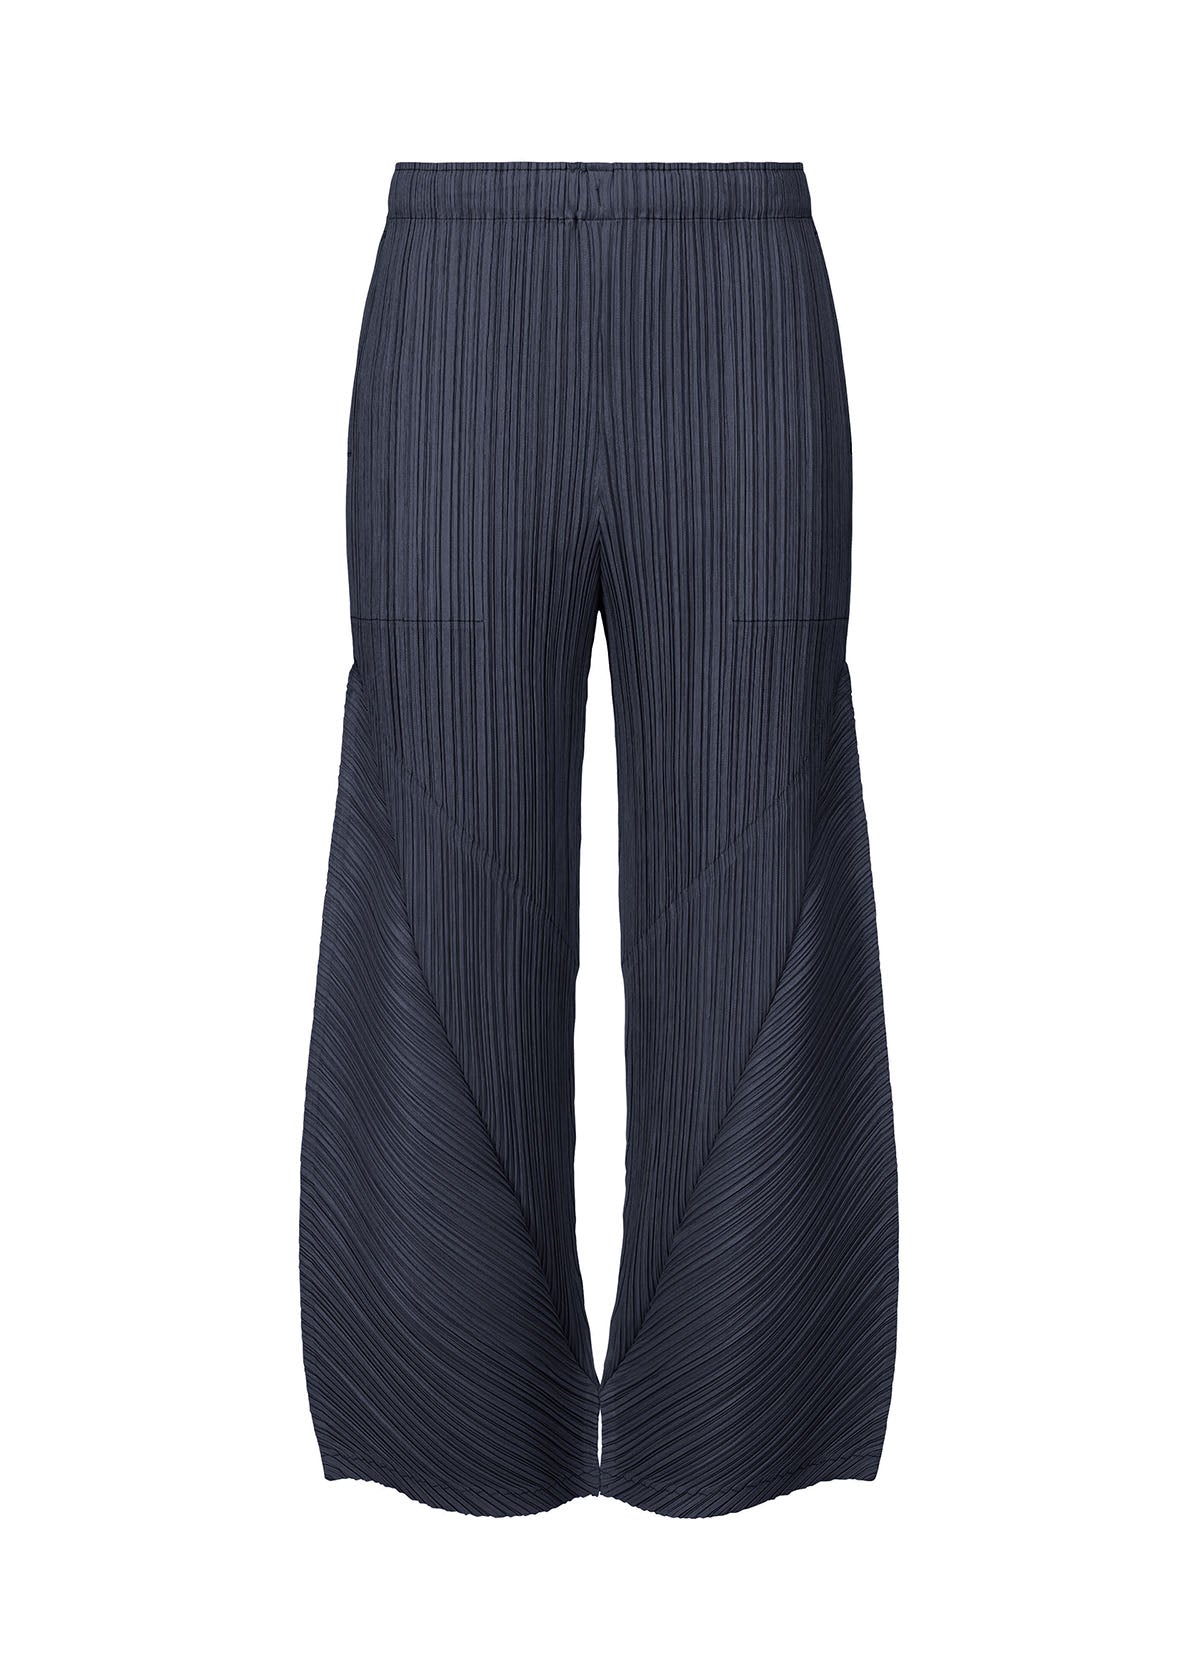 THICKER BOTTOMS 1 PANTS | The official ISSEY MIYAKE ONLINE STORE